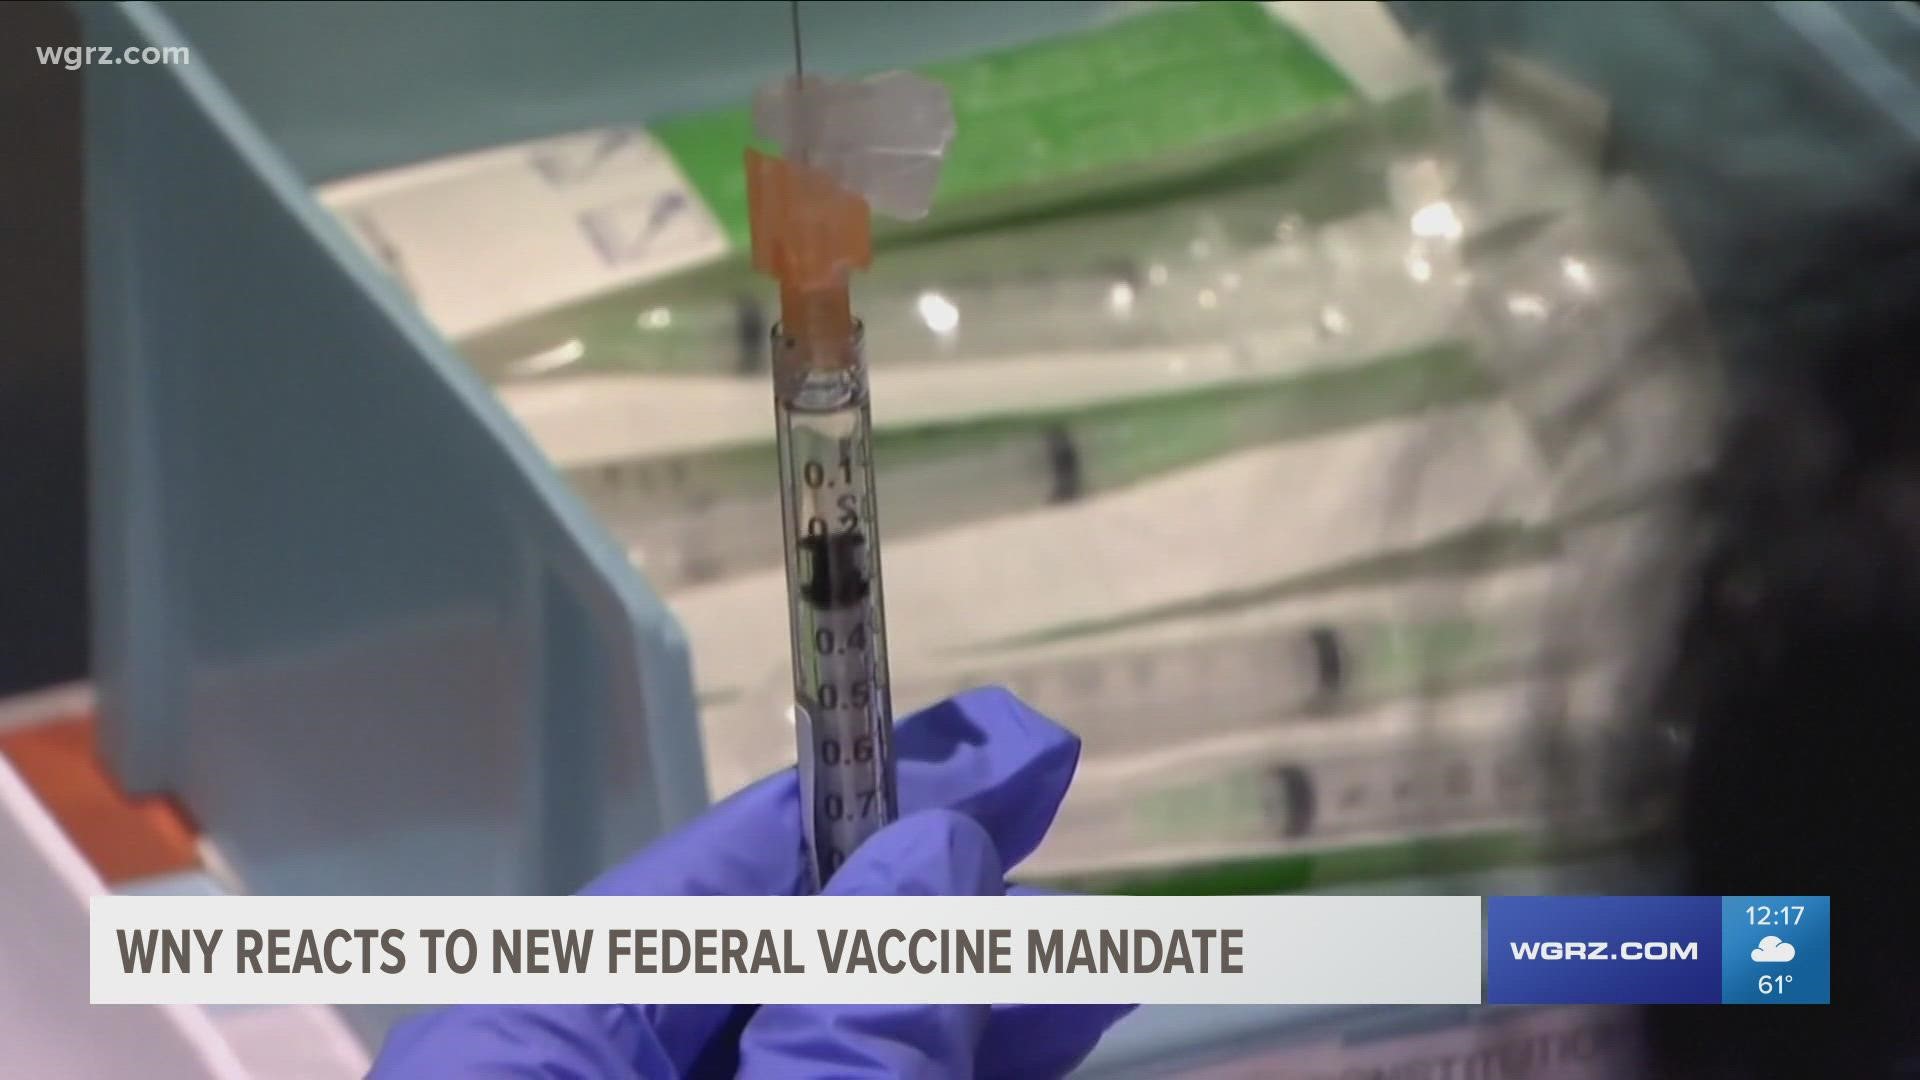 In accordance with the new federal mandate, employers with more than 100 employees will require them to be fully vaccinated.